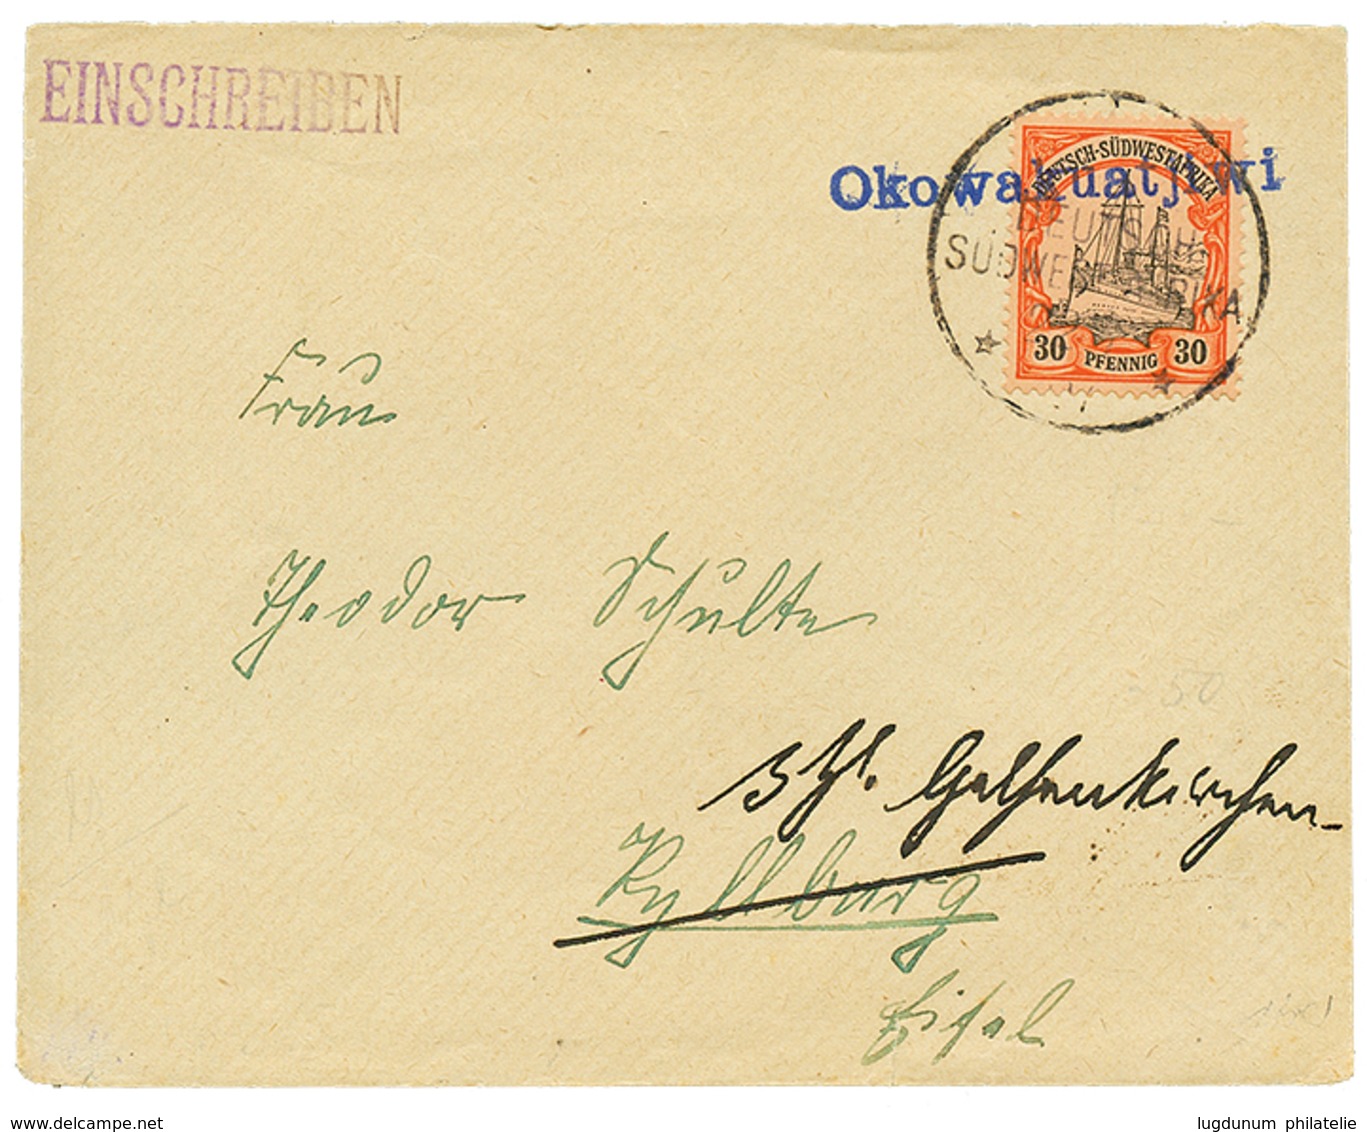 1081 30pf Canc. Blue OKOWAKUATJIWI On REGISTERED Envelope To GERMANY. Superb. - Sud-Ouest Africain Allemand